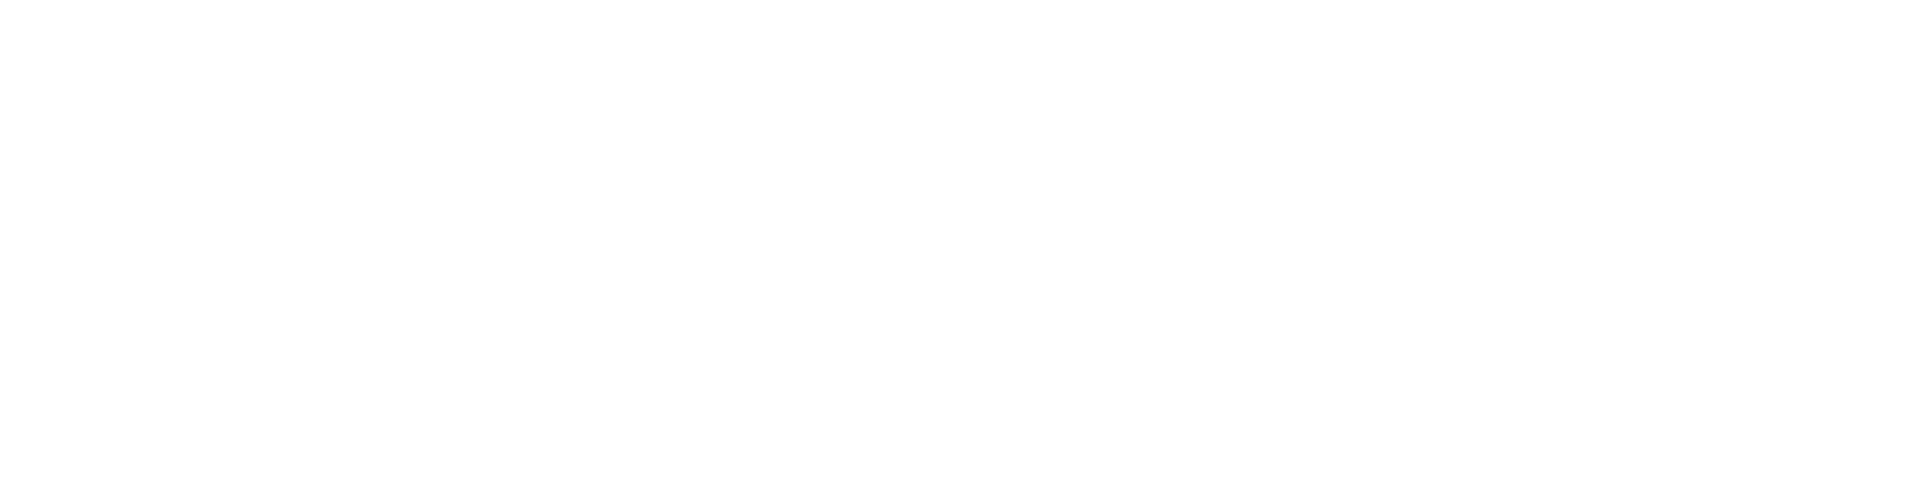 Link to project matchplaytime.com